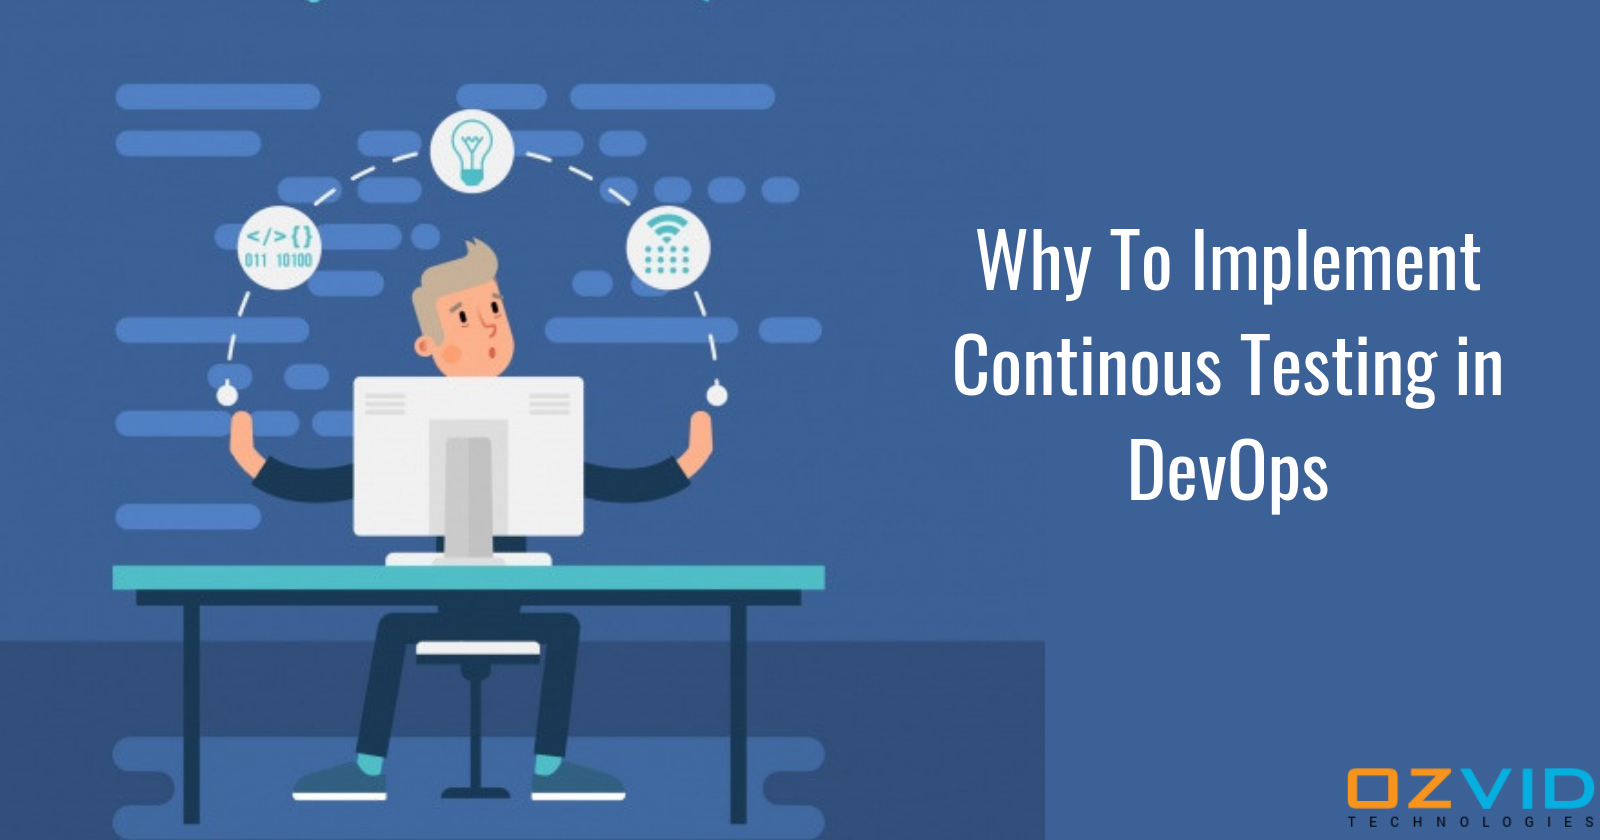 Why To Implement Continous Testing in DevOps